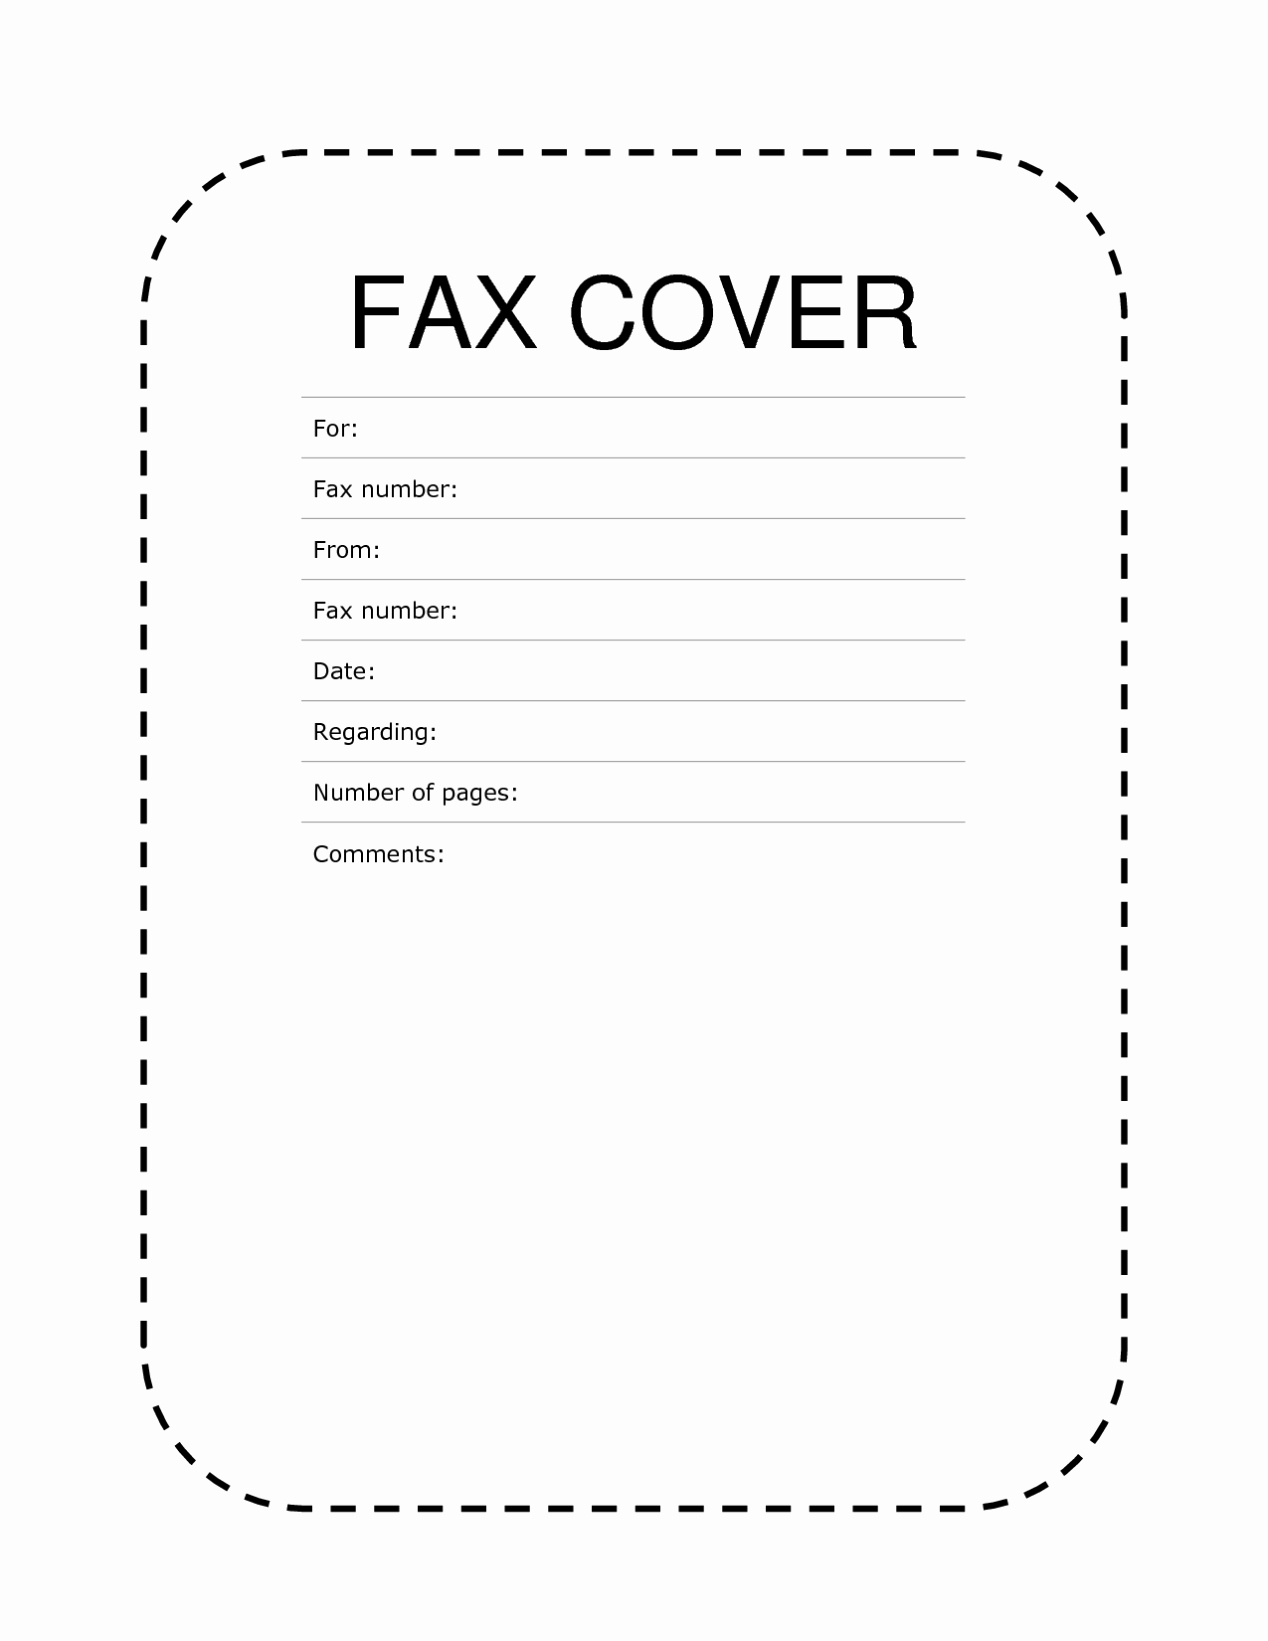 Word Fax Cover Sheet Templates Elegant Free Printable Fax Cover Sheet Pdf Word Template Sample